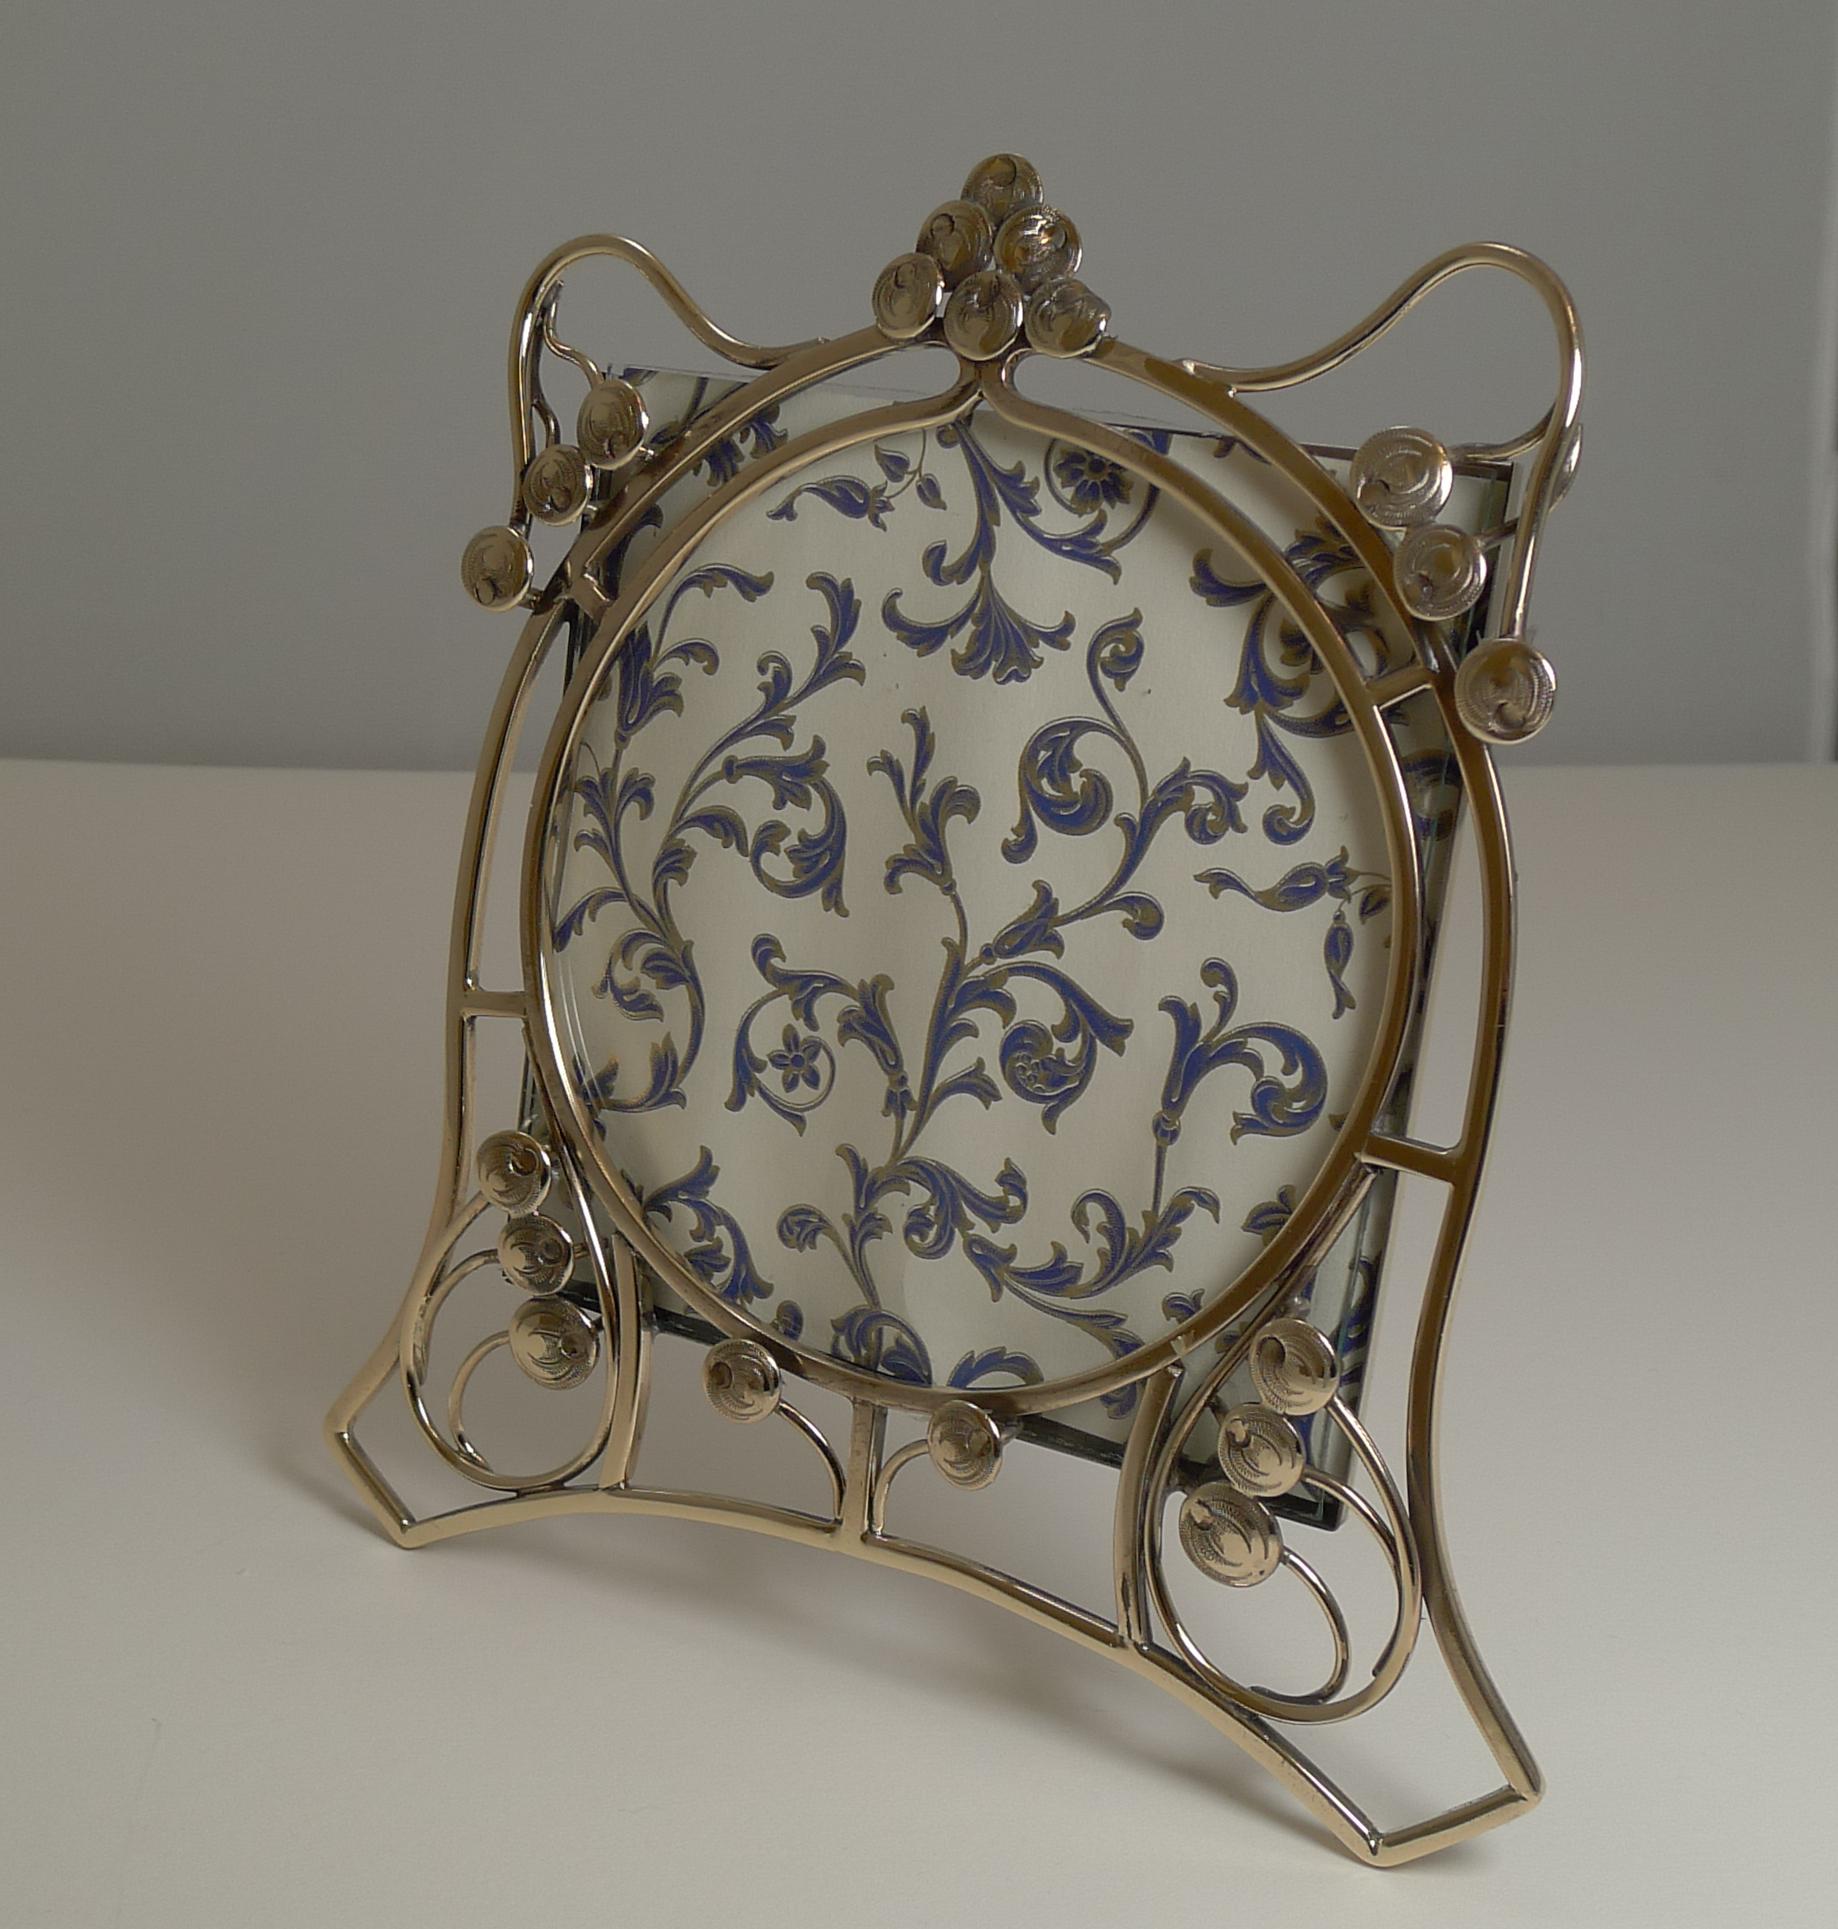 Early 20th Century Art Nouveau Brass Photograph / Picture Frame, circa 1900